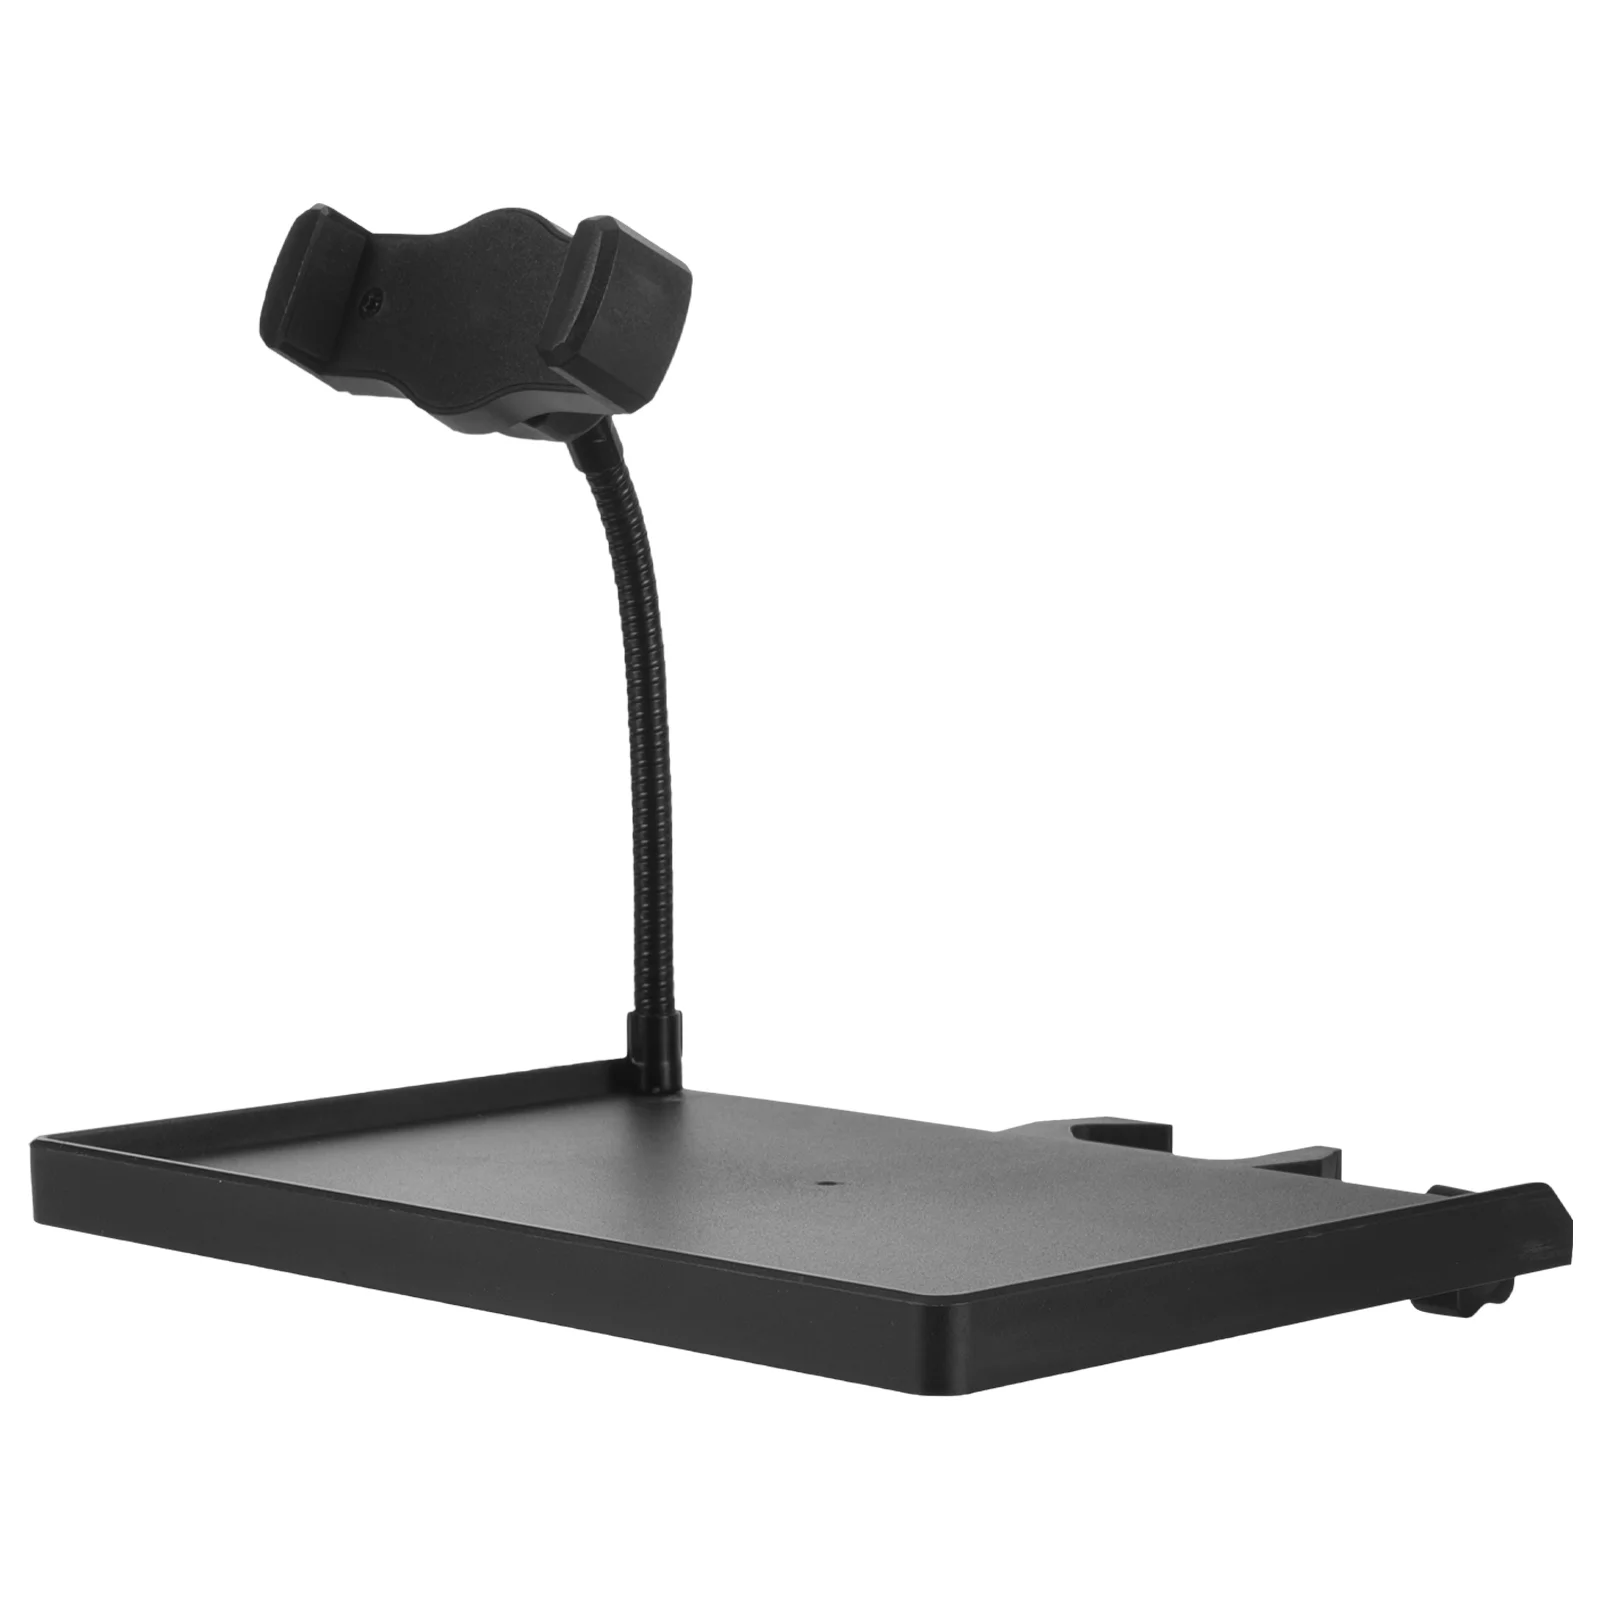 

Microphone Tray Sound Live Plastic Serving Trays Stand Rack Movable Mobile Holder Clamp-on Card